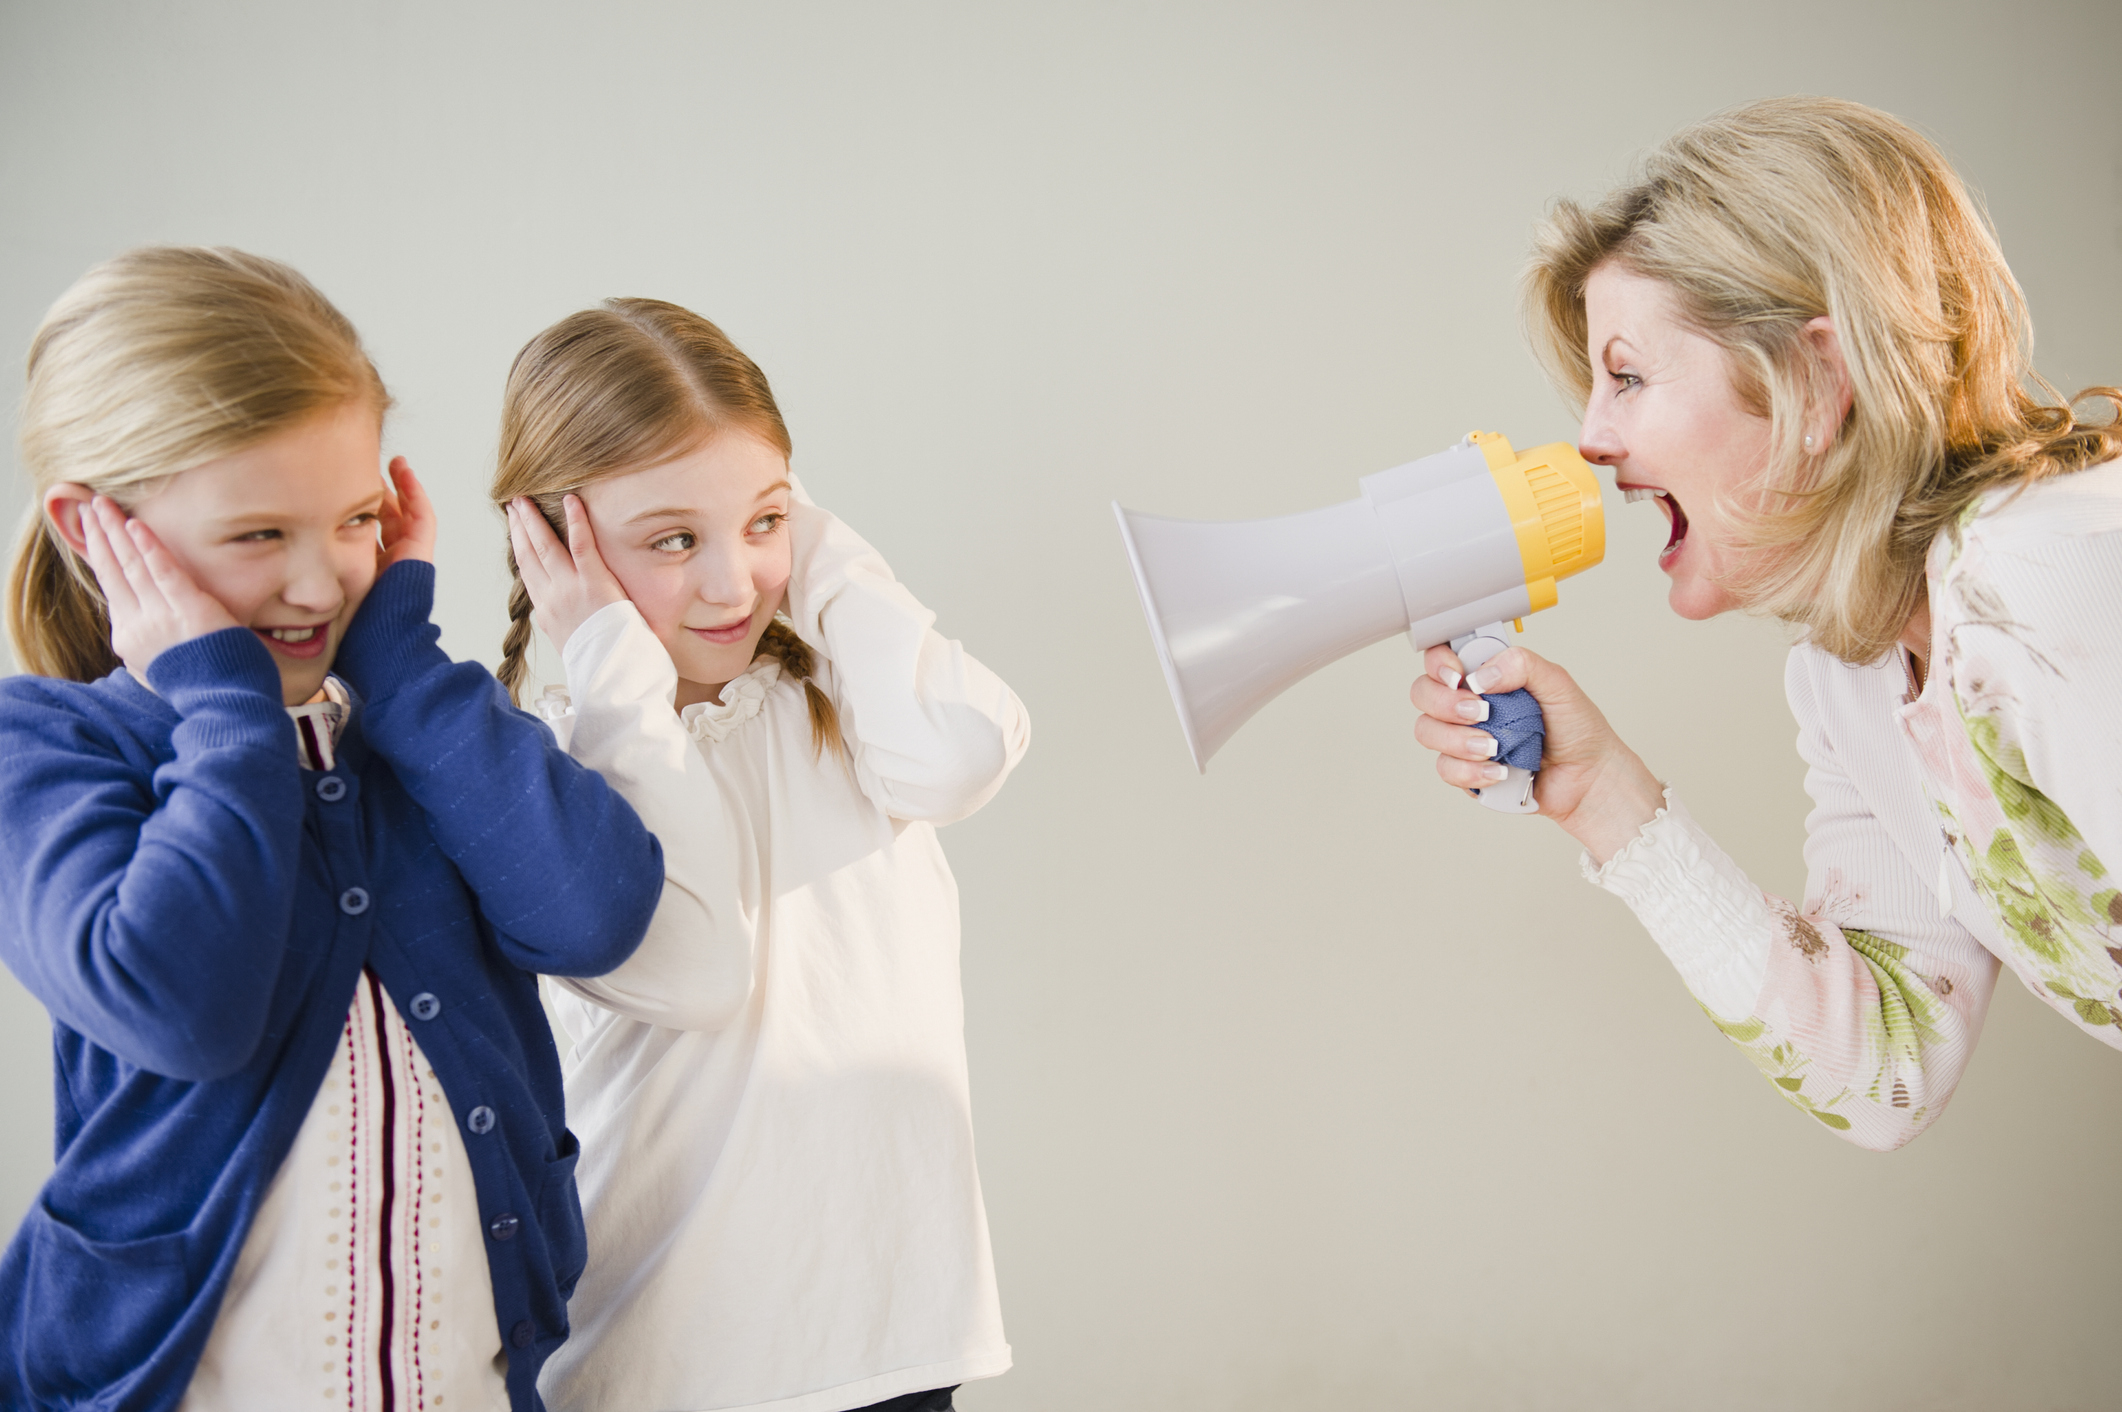 A woman yelling at her daughters with a megaphone